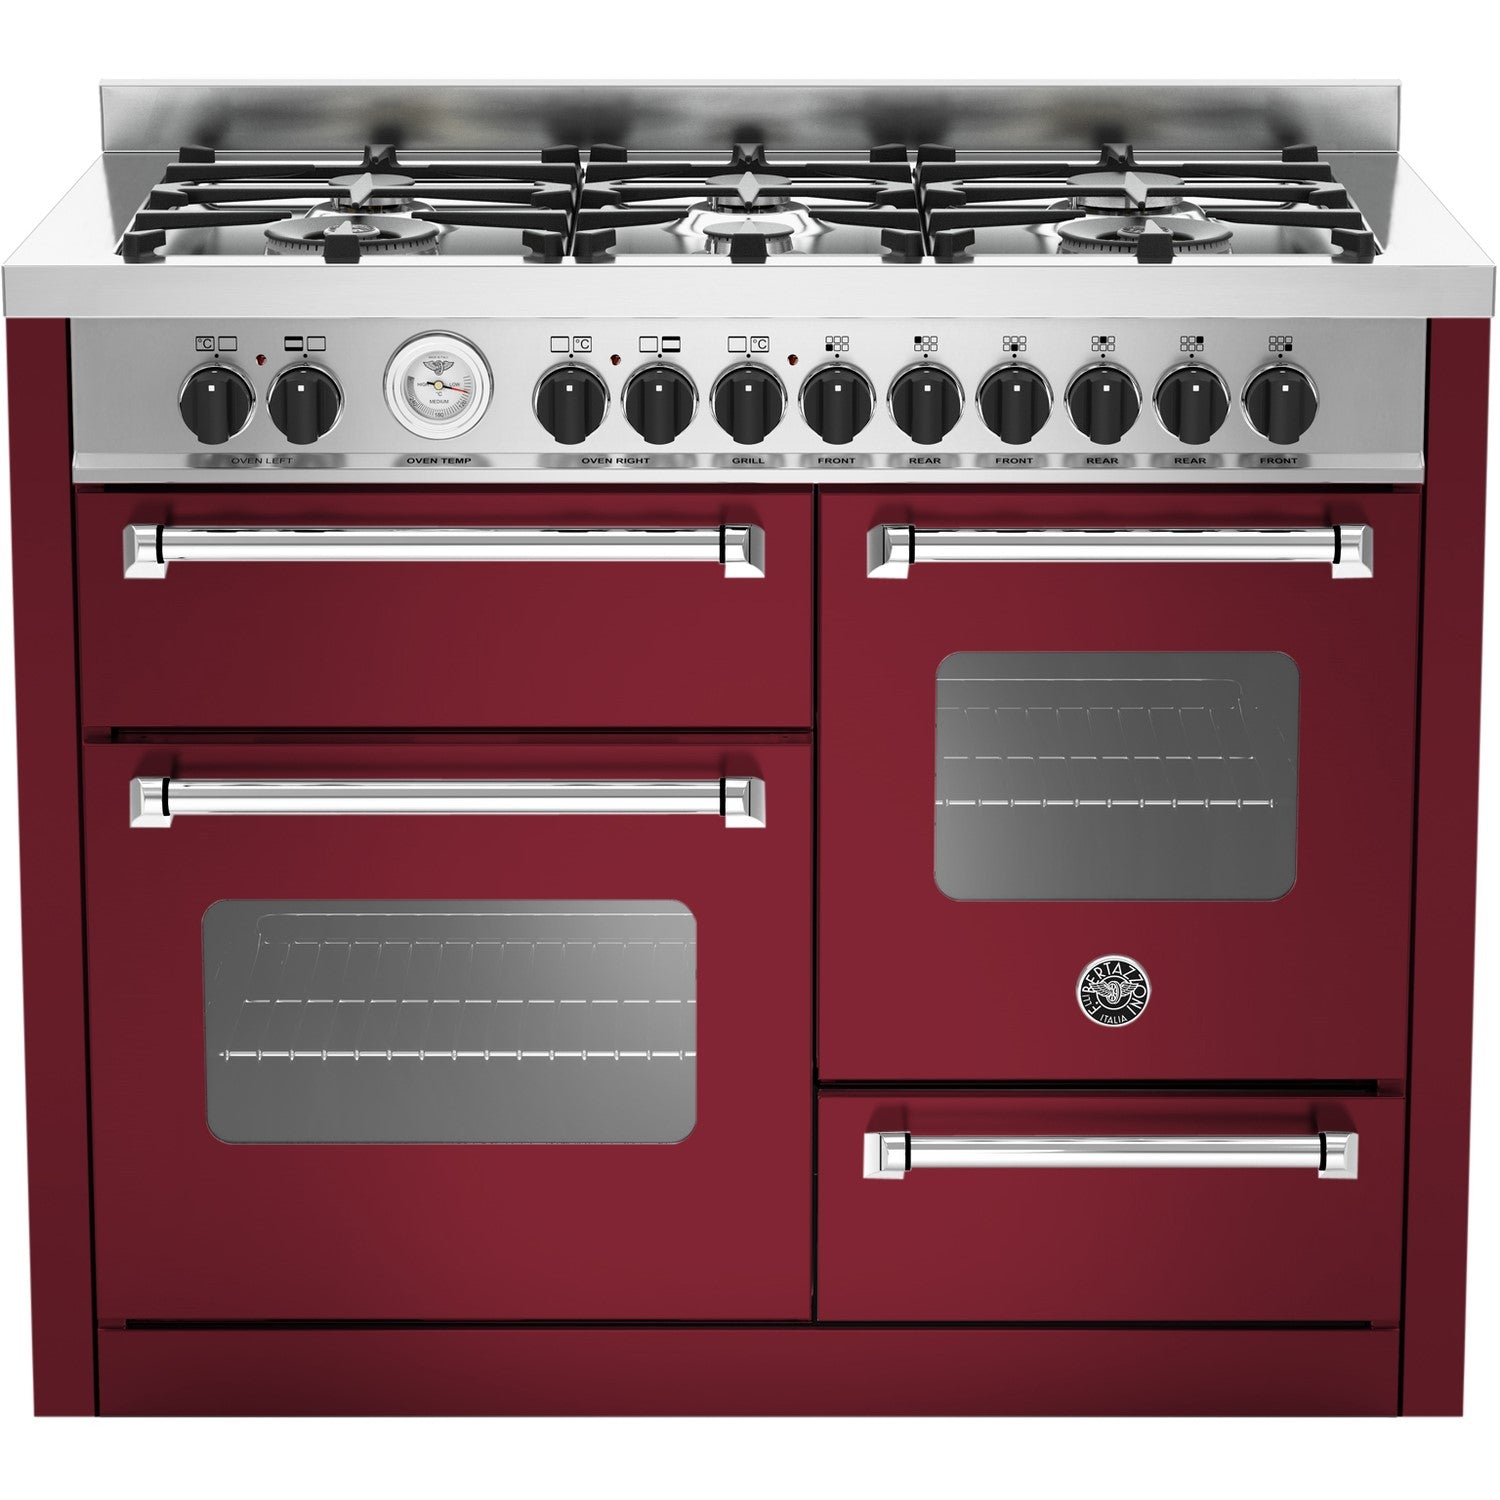 Bertazzoni Uk Limited Mas1106mfetvie 110cm Dual Fuel Range Cooker Matt Burgundy One Only To Clear At This Price Save 1631000